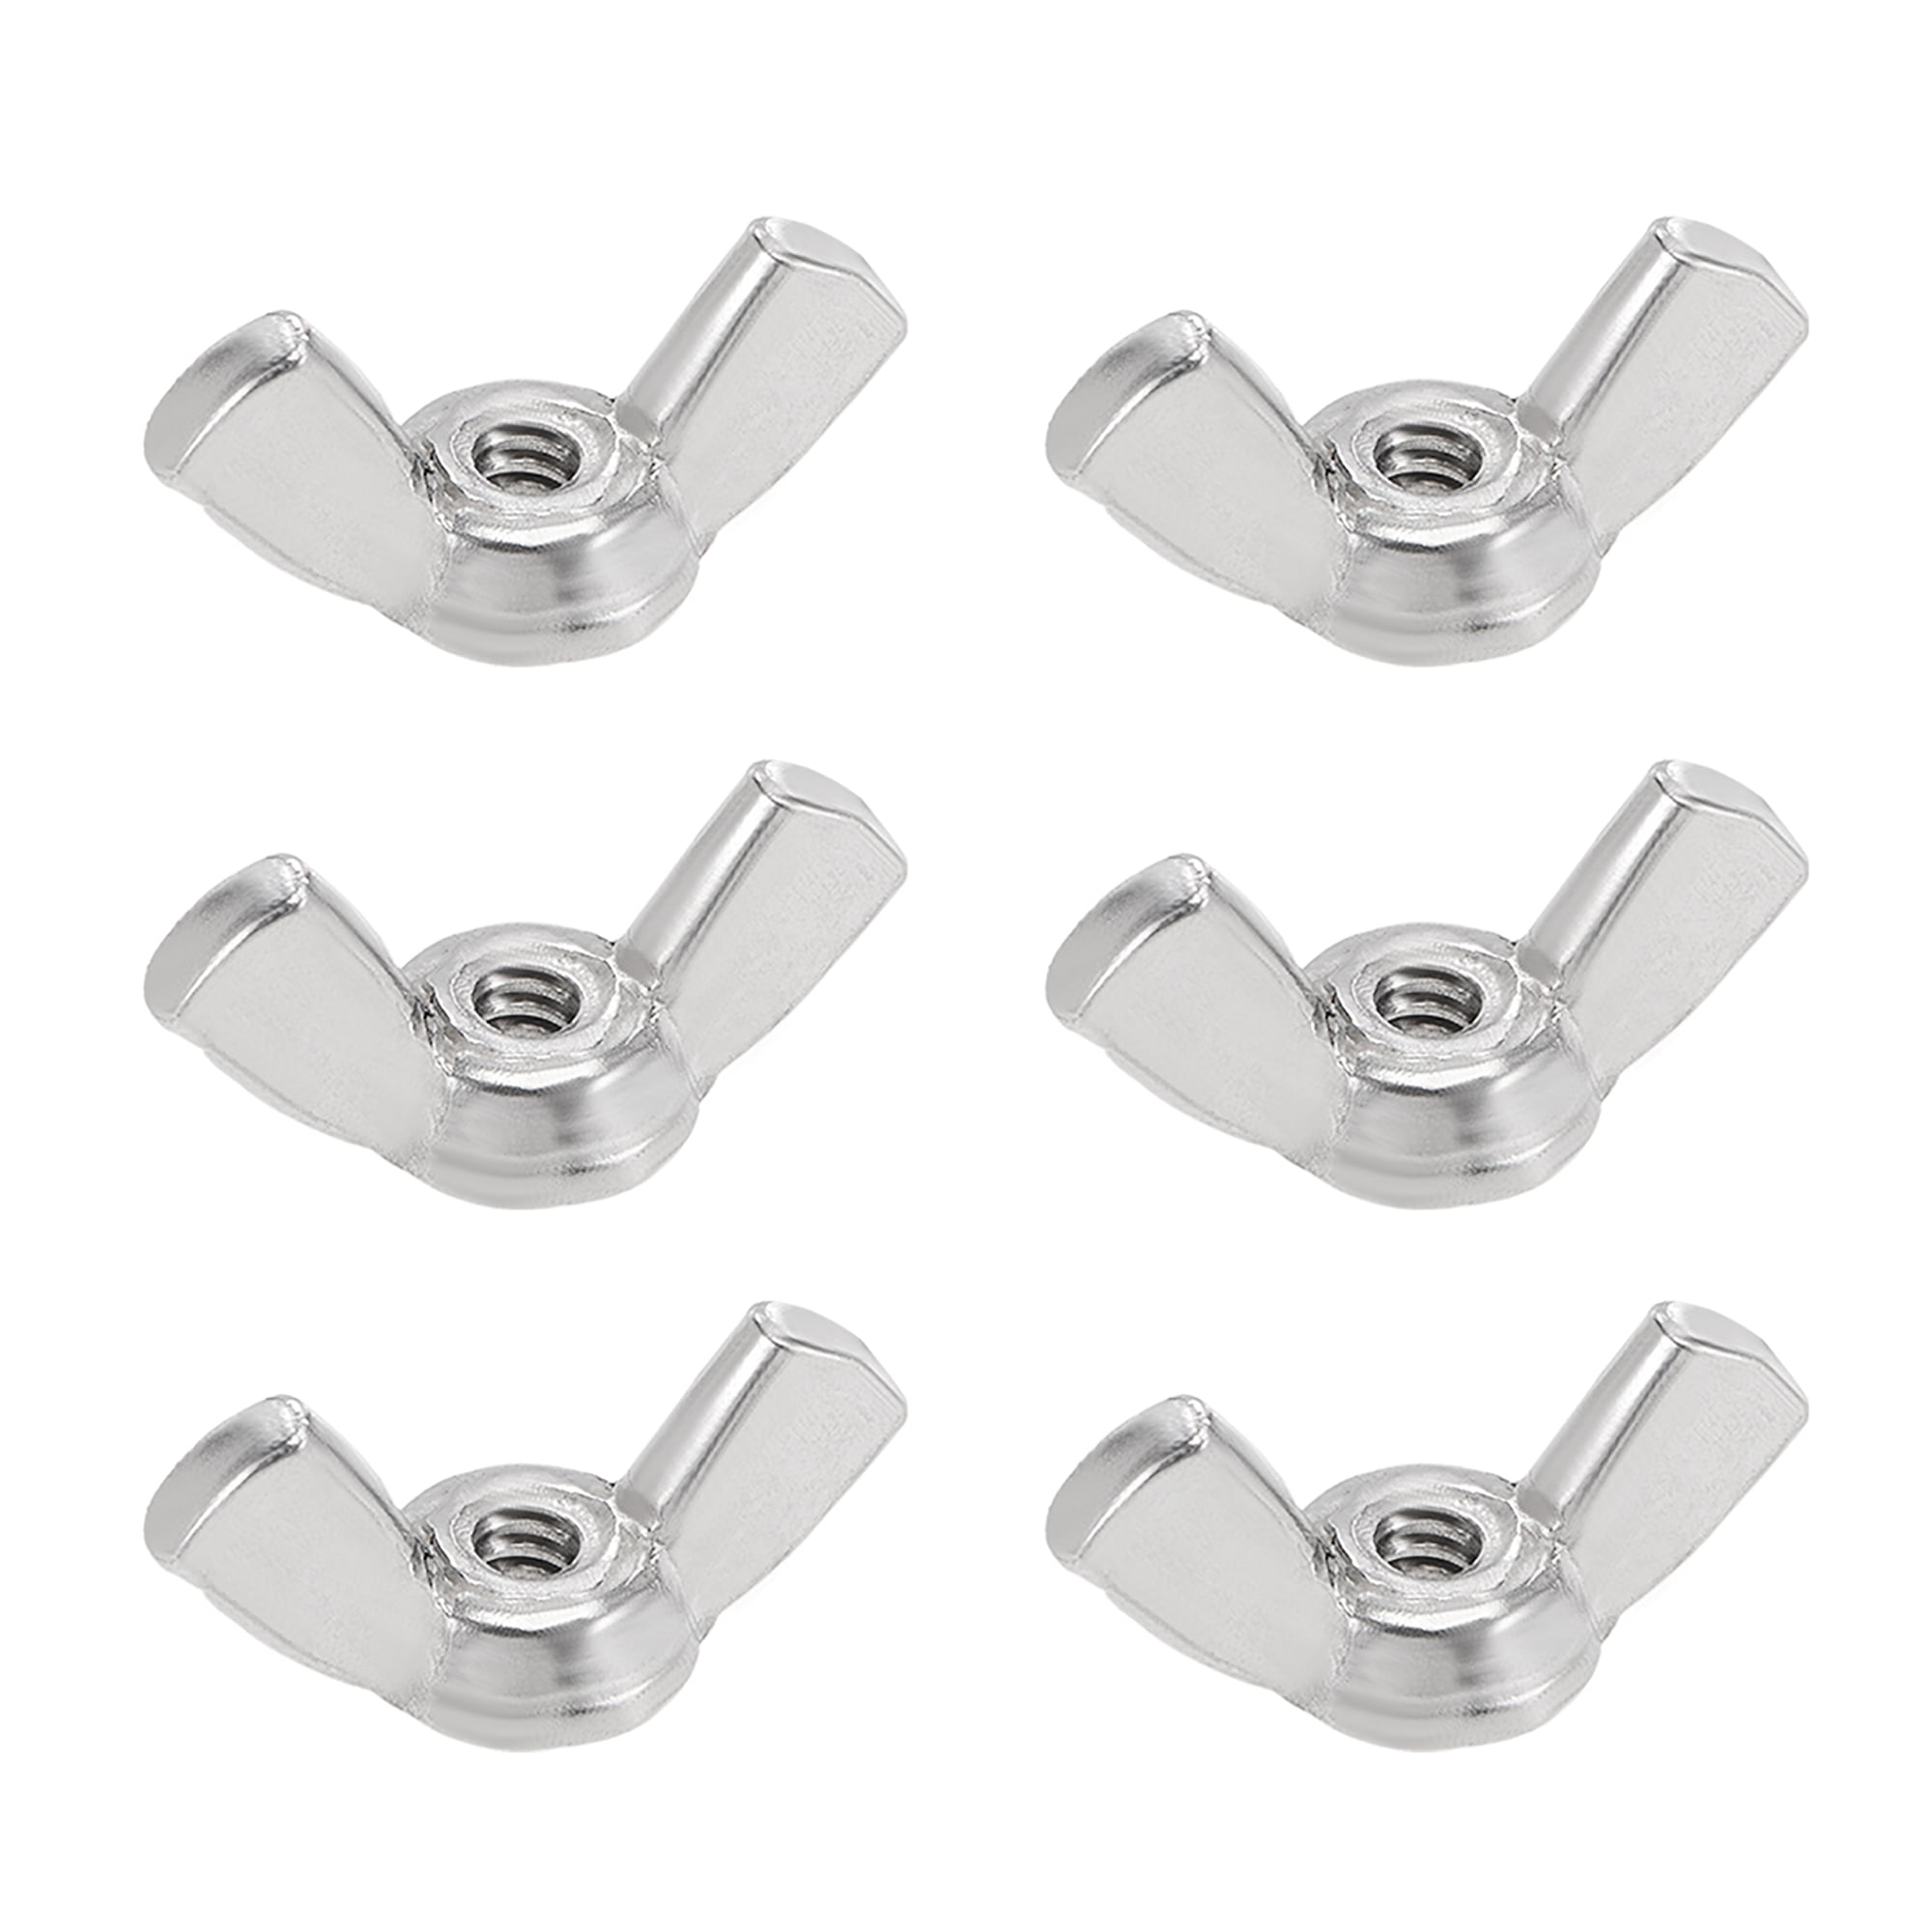 Butterfly Nut Wing Nut Butterfly Wing Nut Fasteners Nylon Wing Nuts 6-32 Wing Nuts Natural Nylon Finish 25 Nylon Wing Nut 6-32 